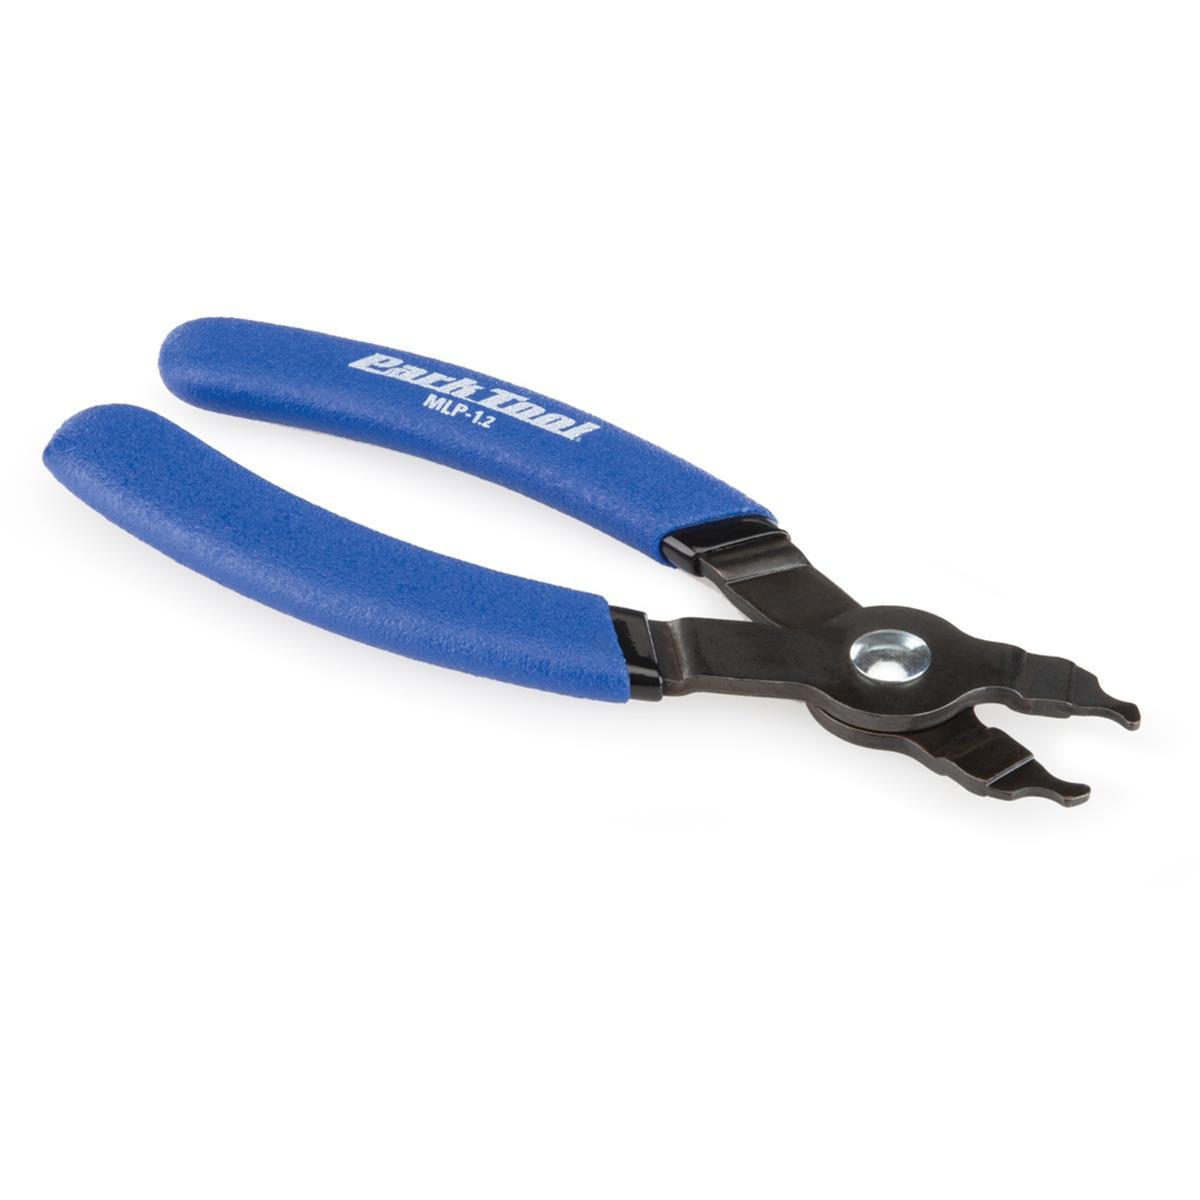 Park Tool Master Link Pliers MLP-1.2 Rubber coated handle